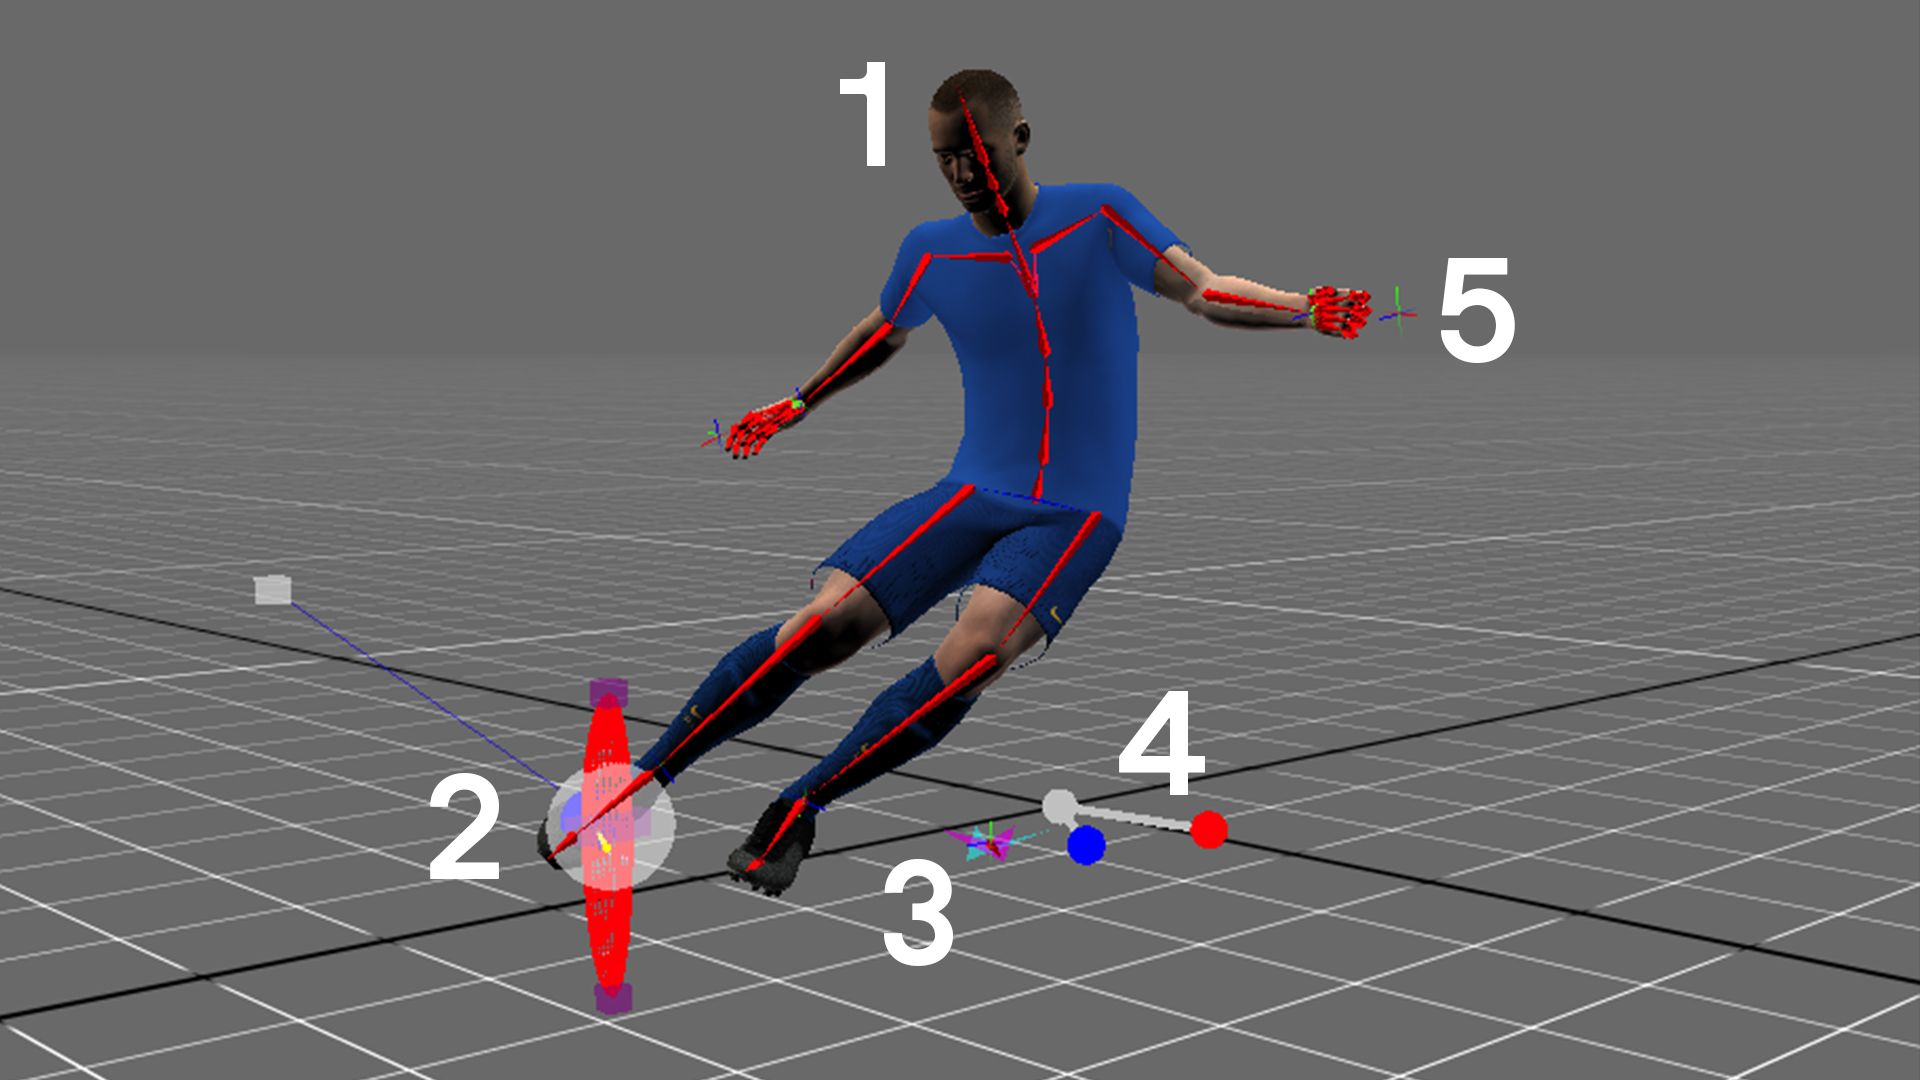 In-development video game screenshot showing a soccer player kicking a ball. The image is annotated with the numbers 1-5